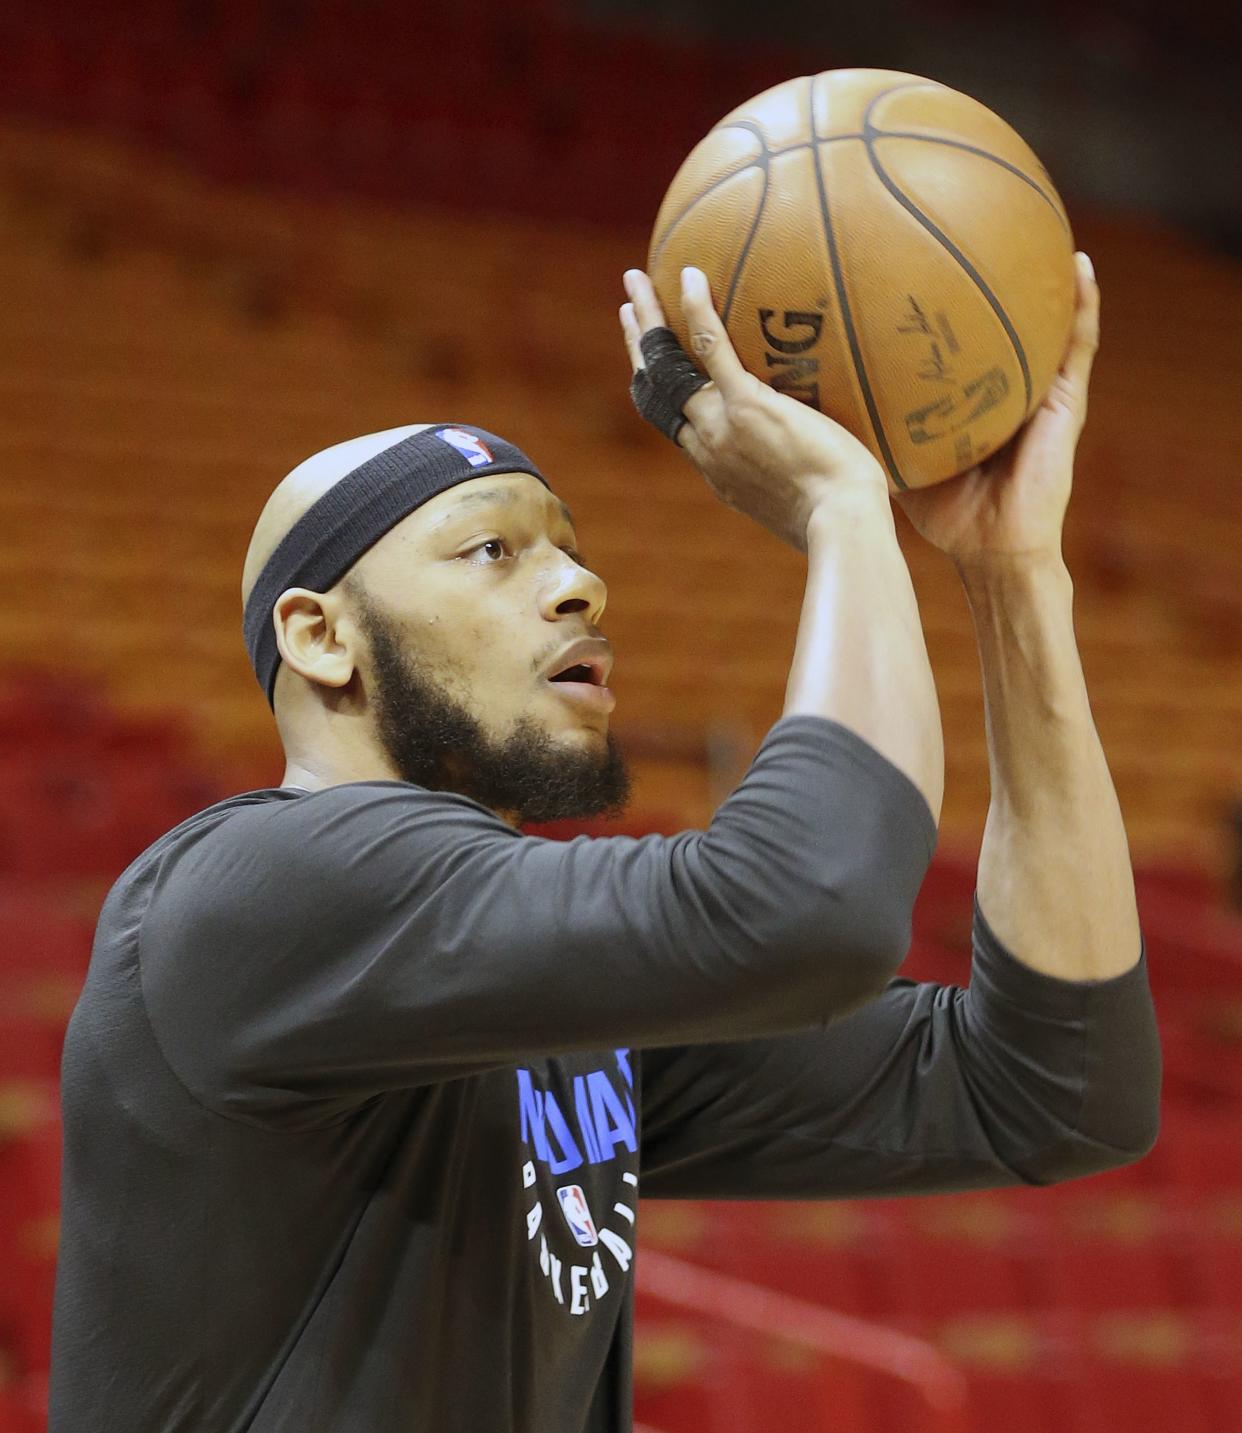 NBA player and former Michigan State basketball star Adreian Payne was shot and killed on Monday, May 9, 2022. He was 31.